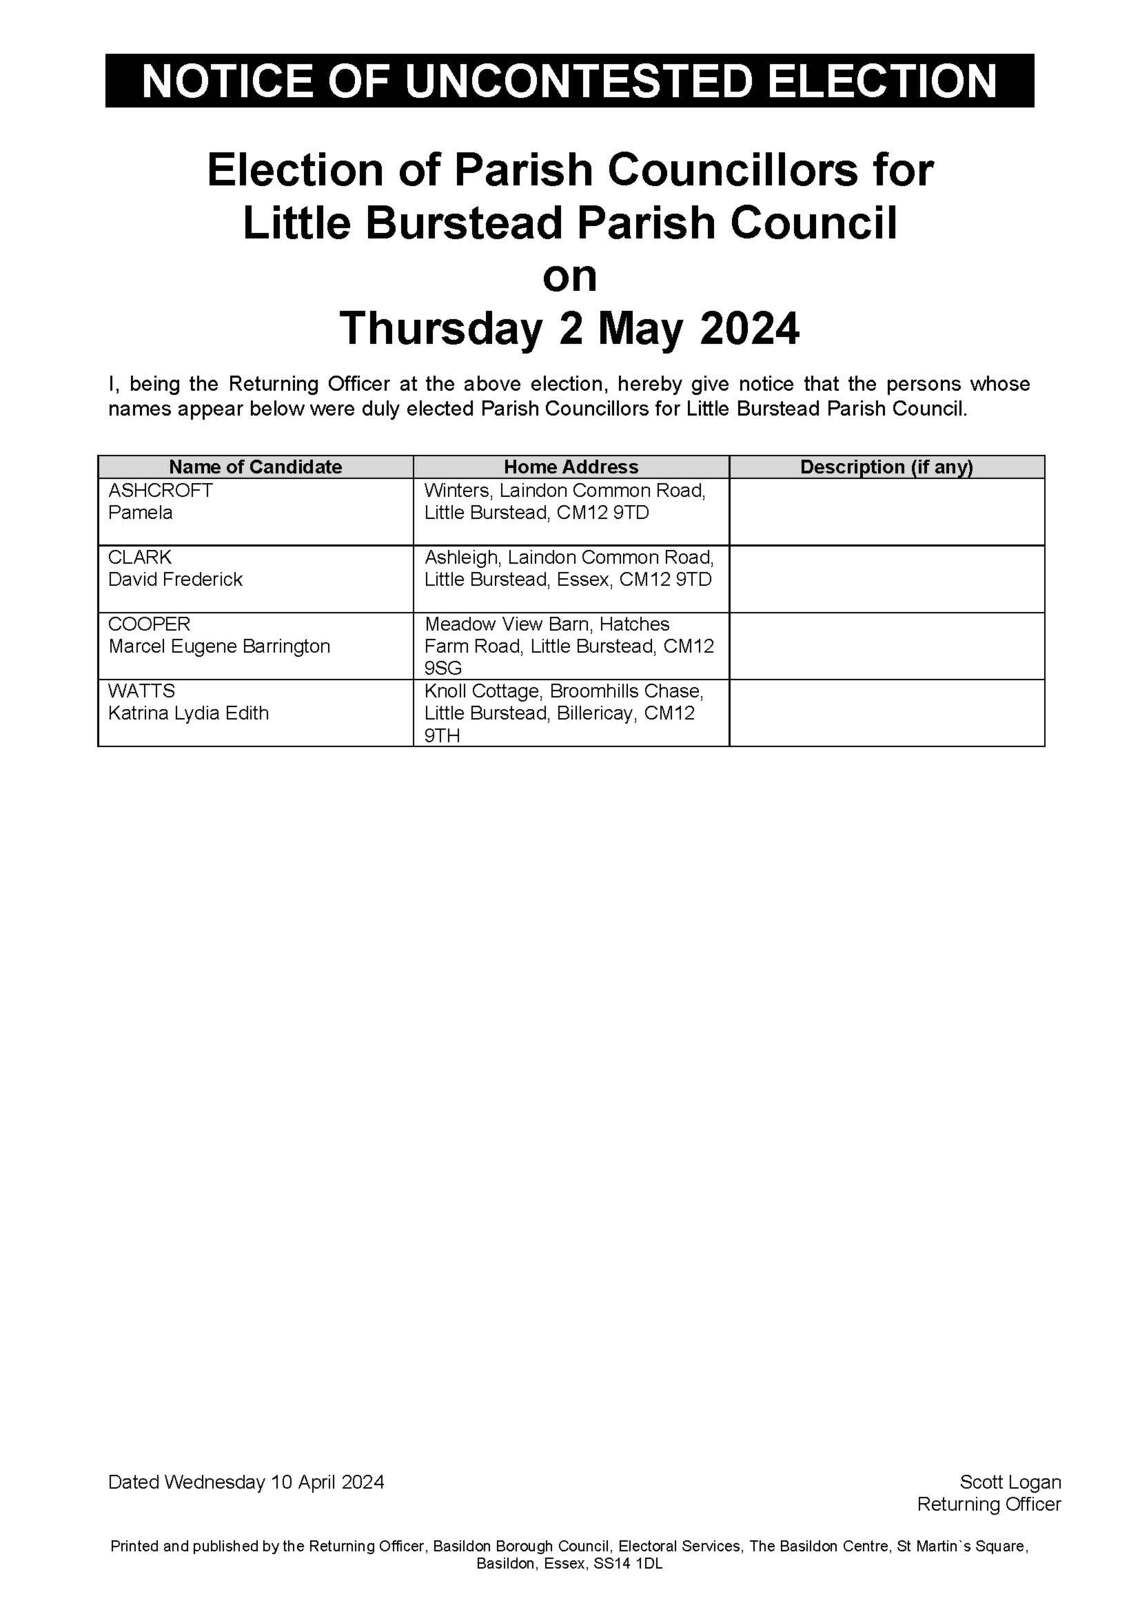 Notice of Uncontested Election 2024 - lists those elected as Pamela Ashcroft, David Clark, Katrina Watts and Marcel Cooper